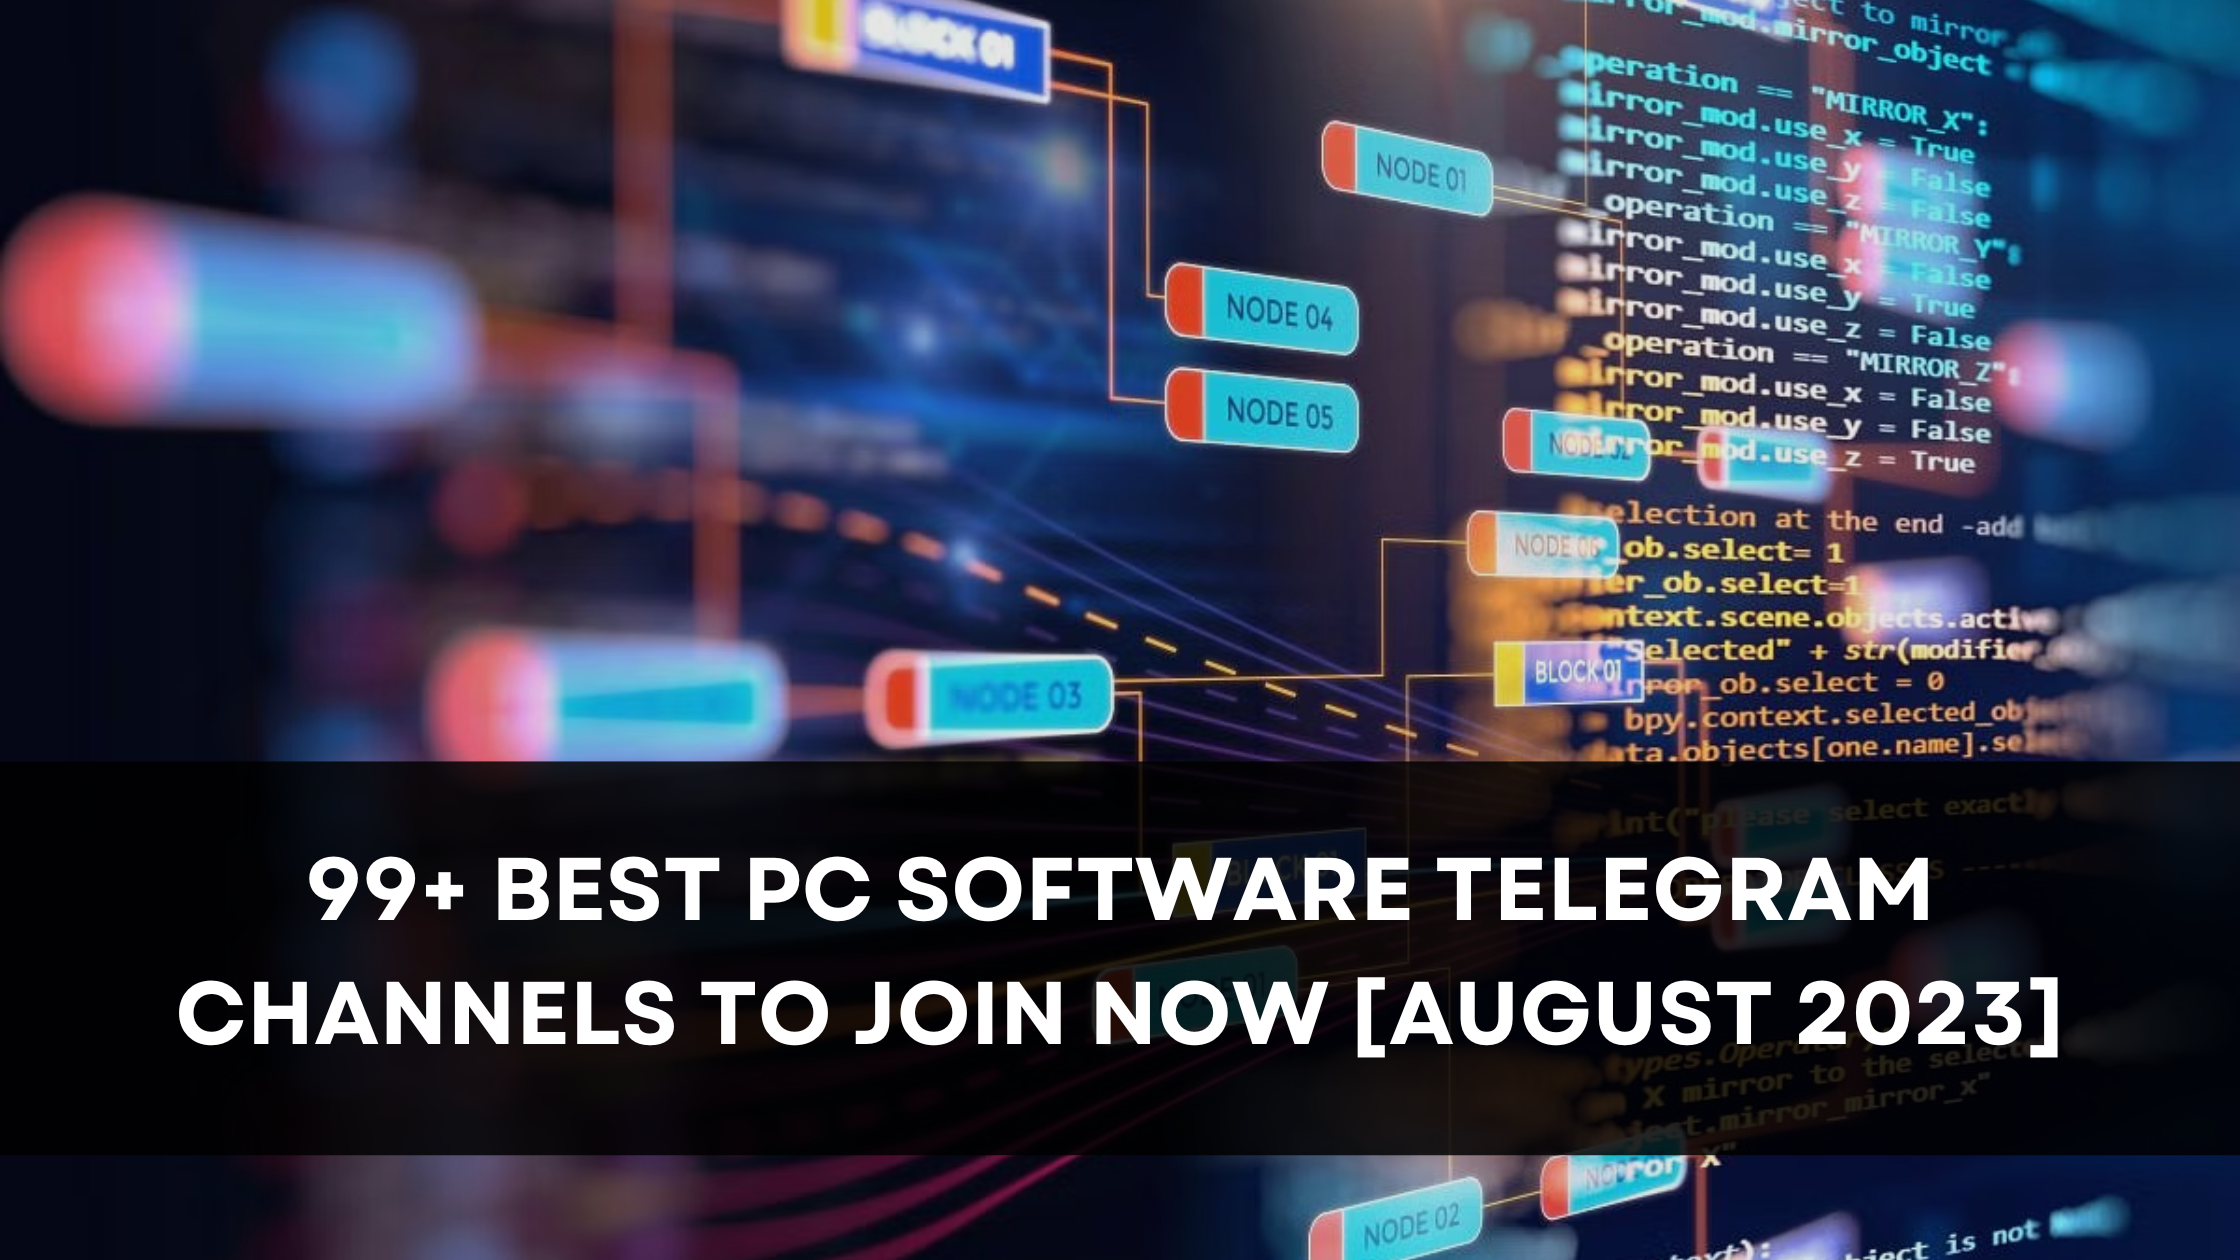 99+ Best PC Software Telegram Channels to Join Now [August 2023]